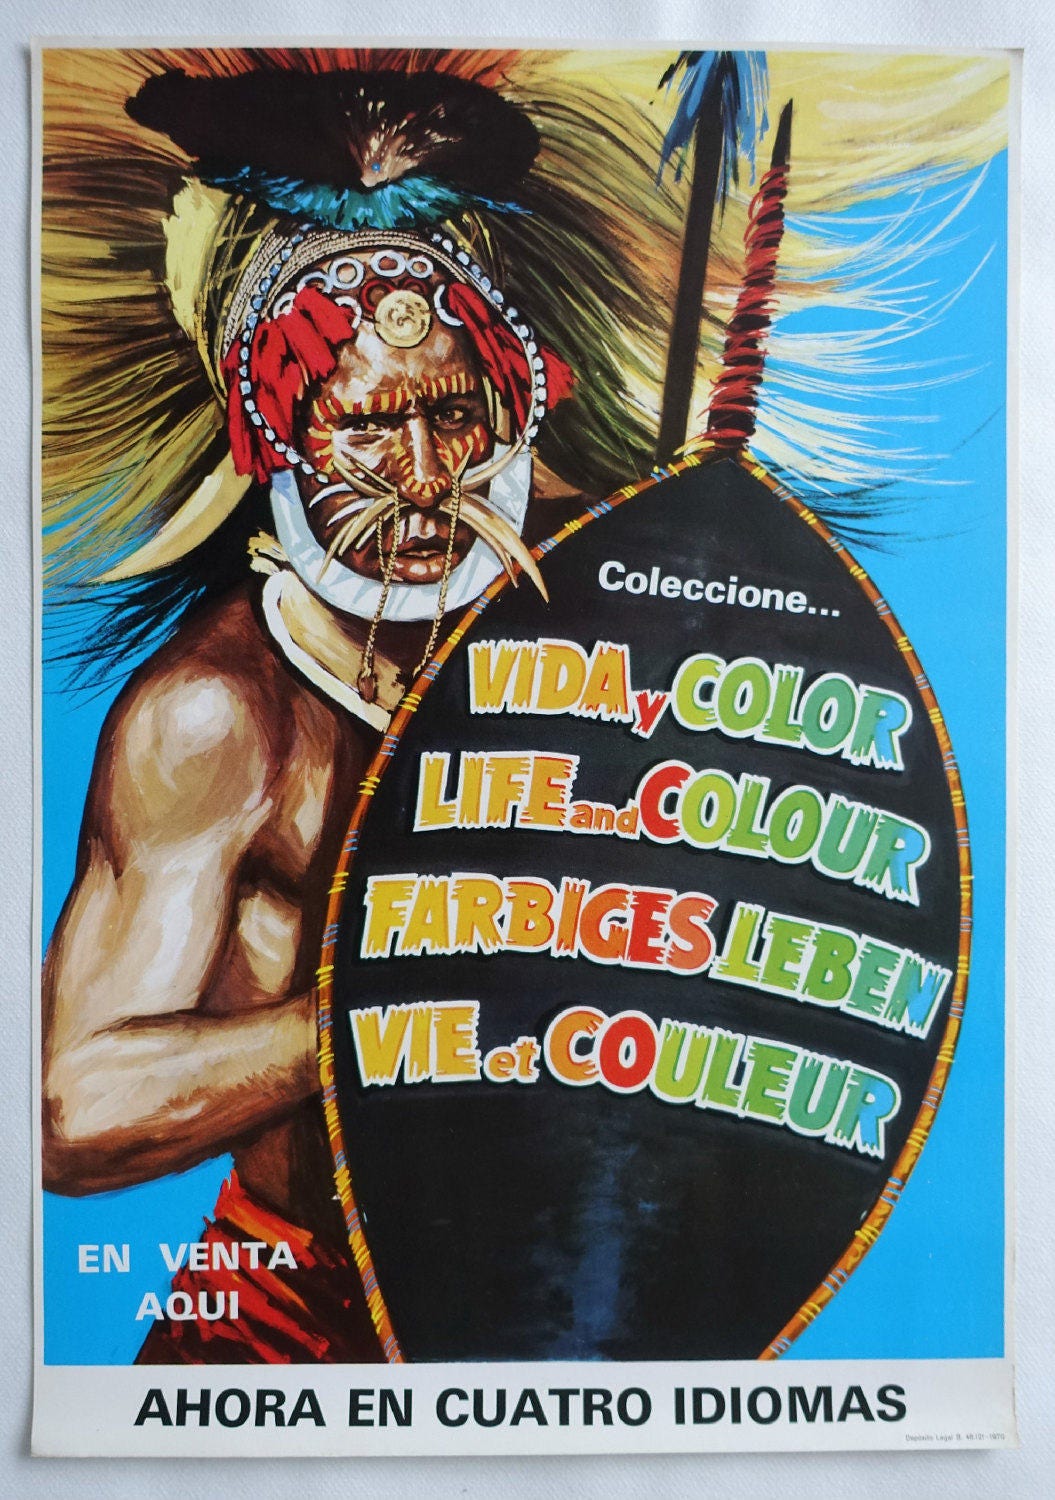 1970 Life and Color - Spanish Advertisement - Original Vintage Poster